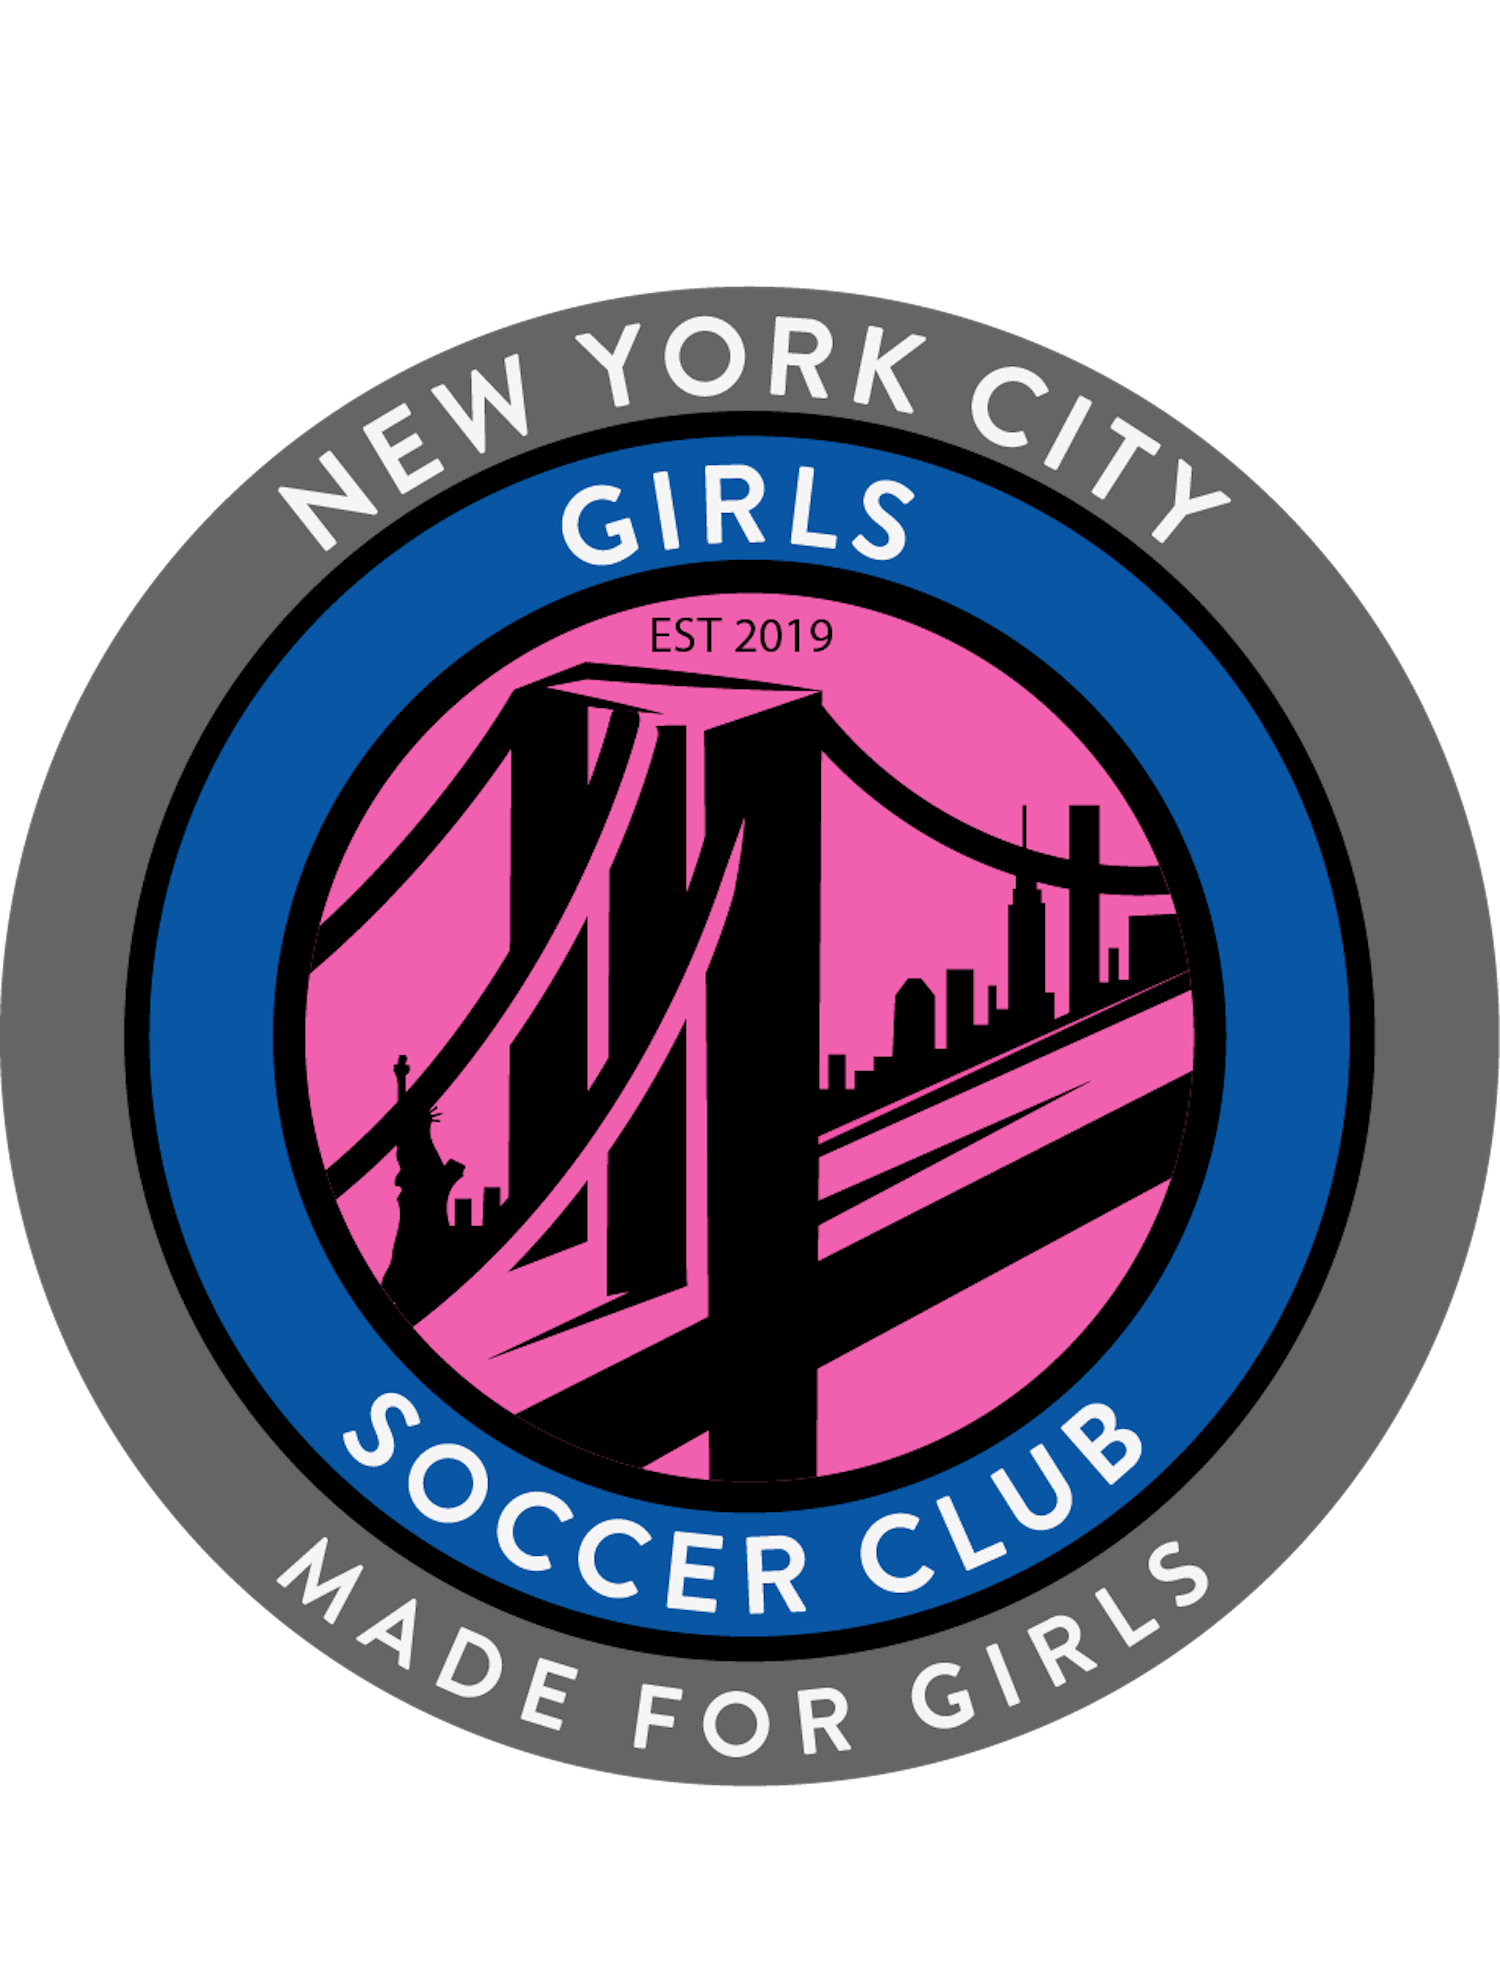 Player Check In — NYC Girls Soccer Club